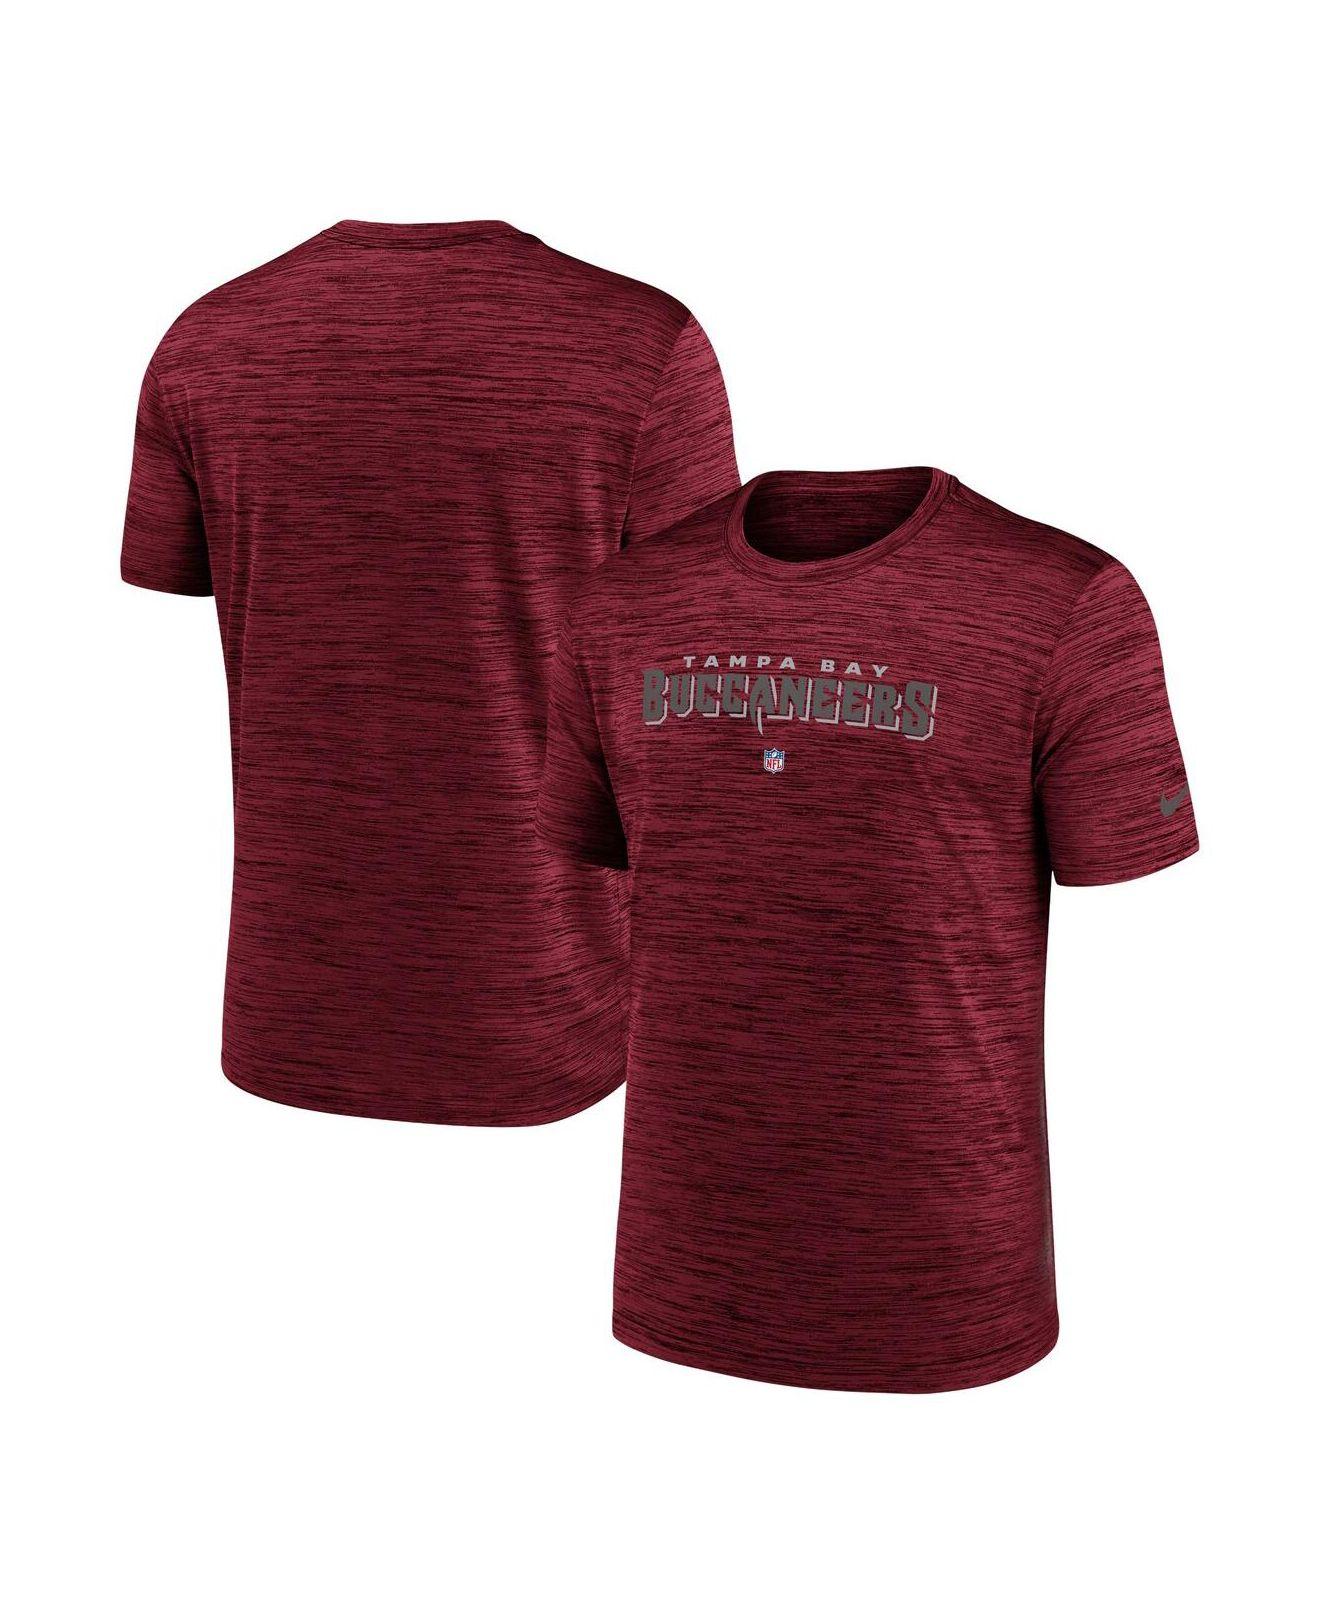 Nike Red Tampa Bay Buccaneers Velocity Performance T-shirt for Men